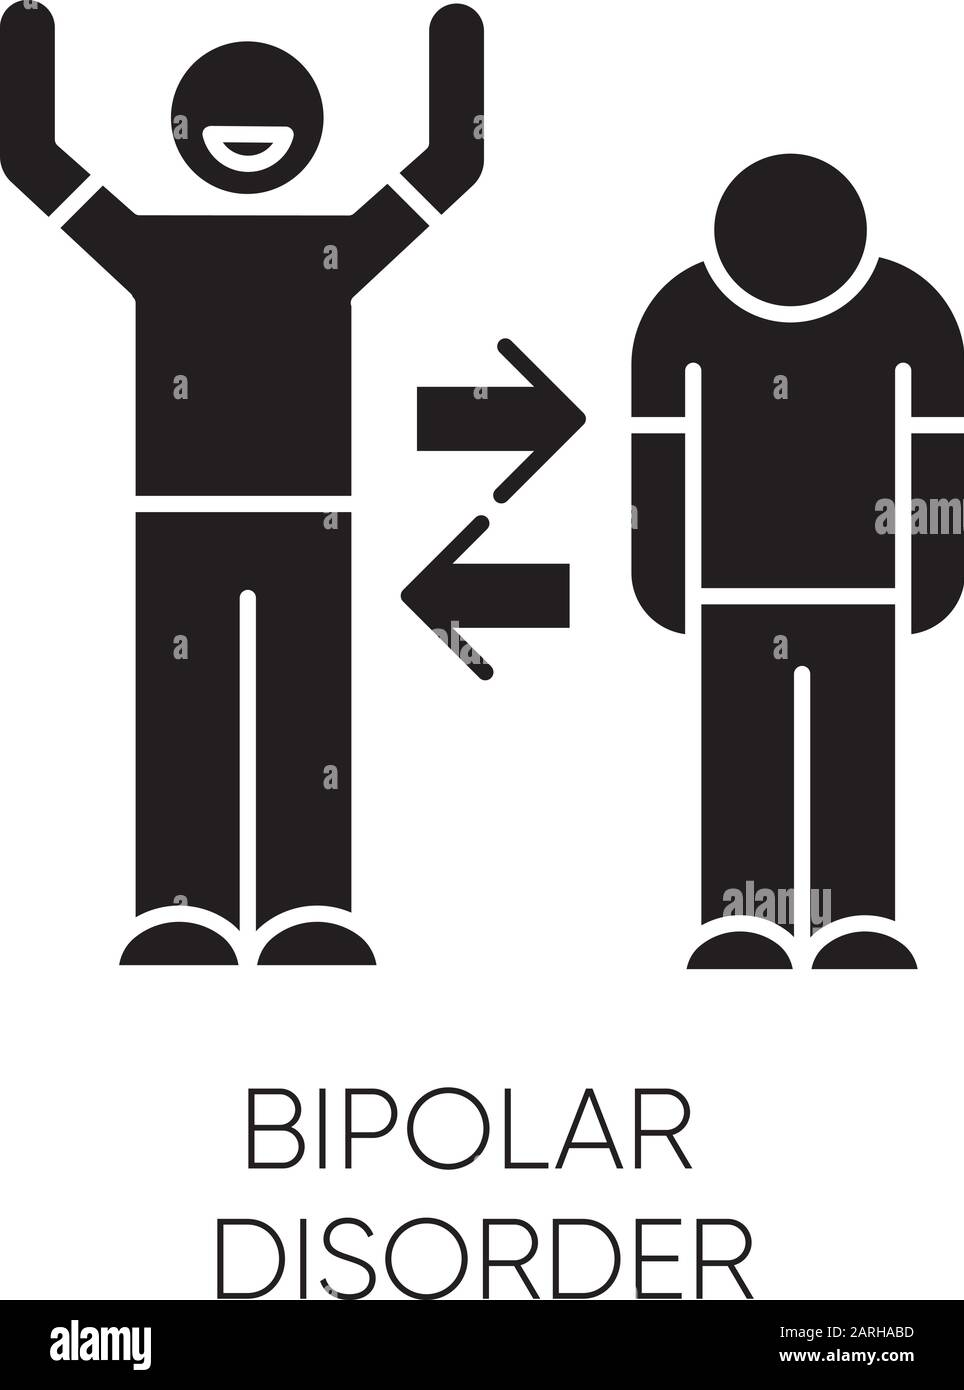 Bipolar disorder glyph icon. Manic and depressive episodes. Split personality. Sad and happy. Emotional swing. Mental health issues. Silhouette symbol Stock Vector